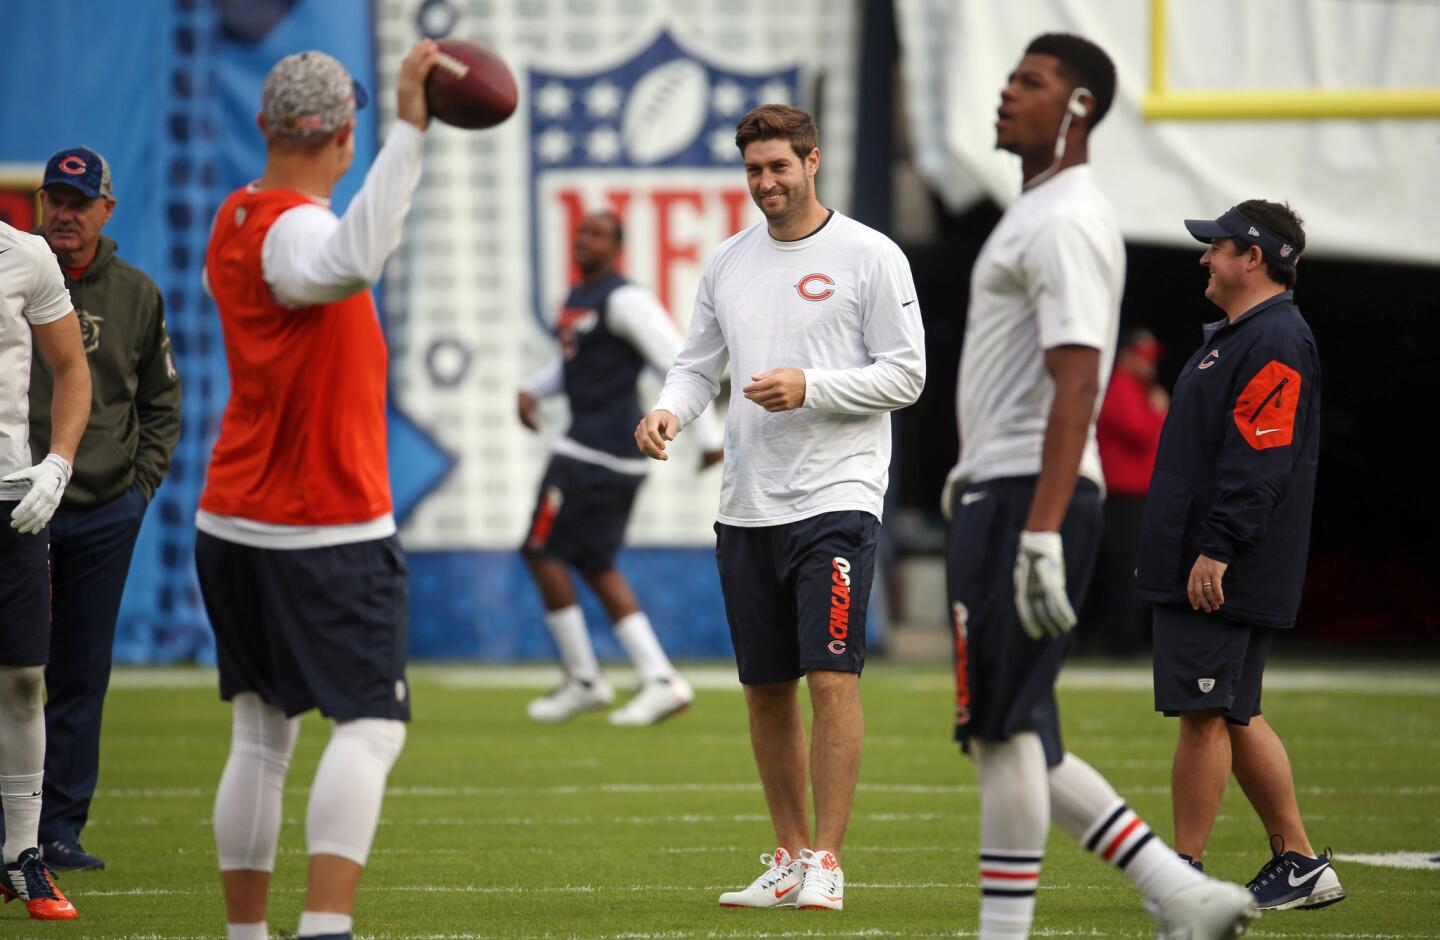 Bears quarterback Jay Cutler warms up with teammates at Qualcomm Stadium.